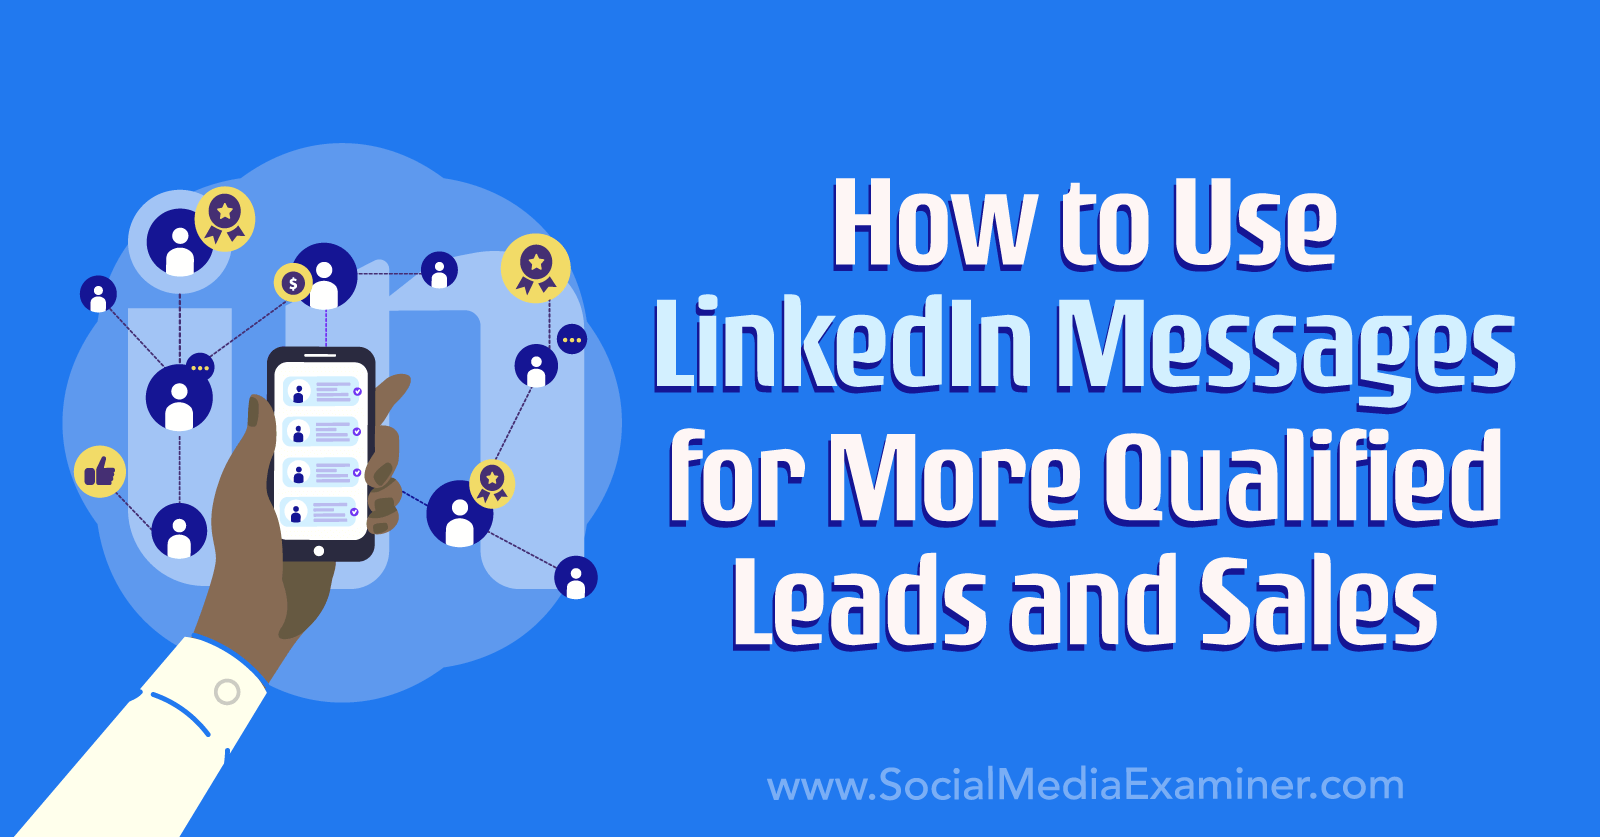 How to Use LinkedIn Messages for More Qualified Leads and Sales by Social Media Examiner